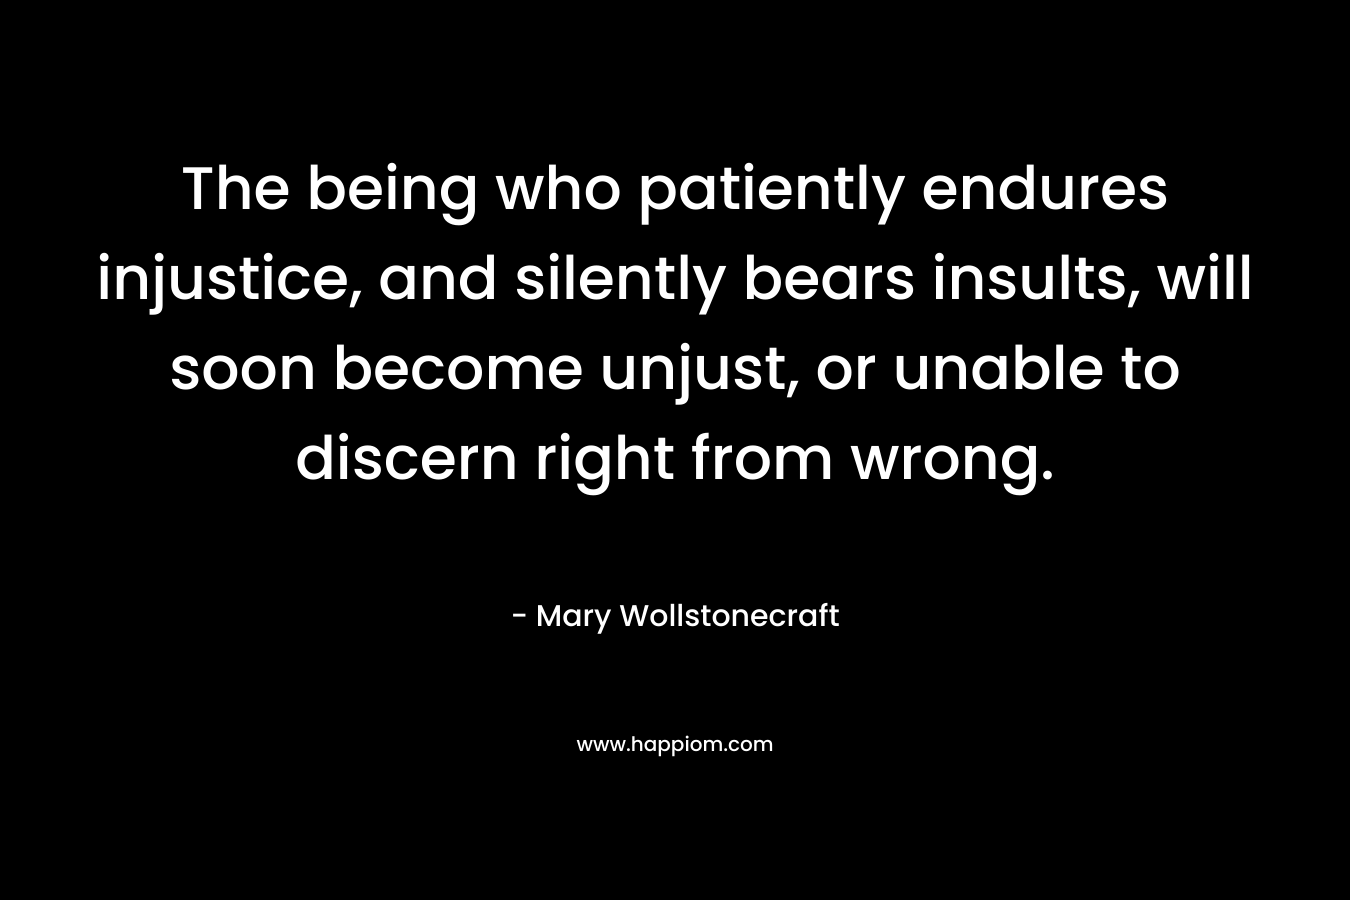 The being who patiently endures injustice, and silently bears insults, will soon become unjust, or unable to discern right from wrong. – Mary Wollstonecraft